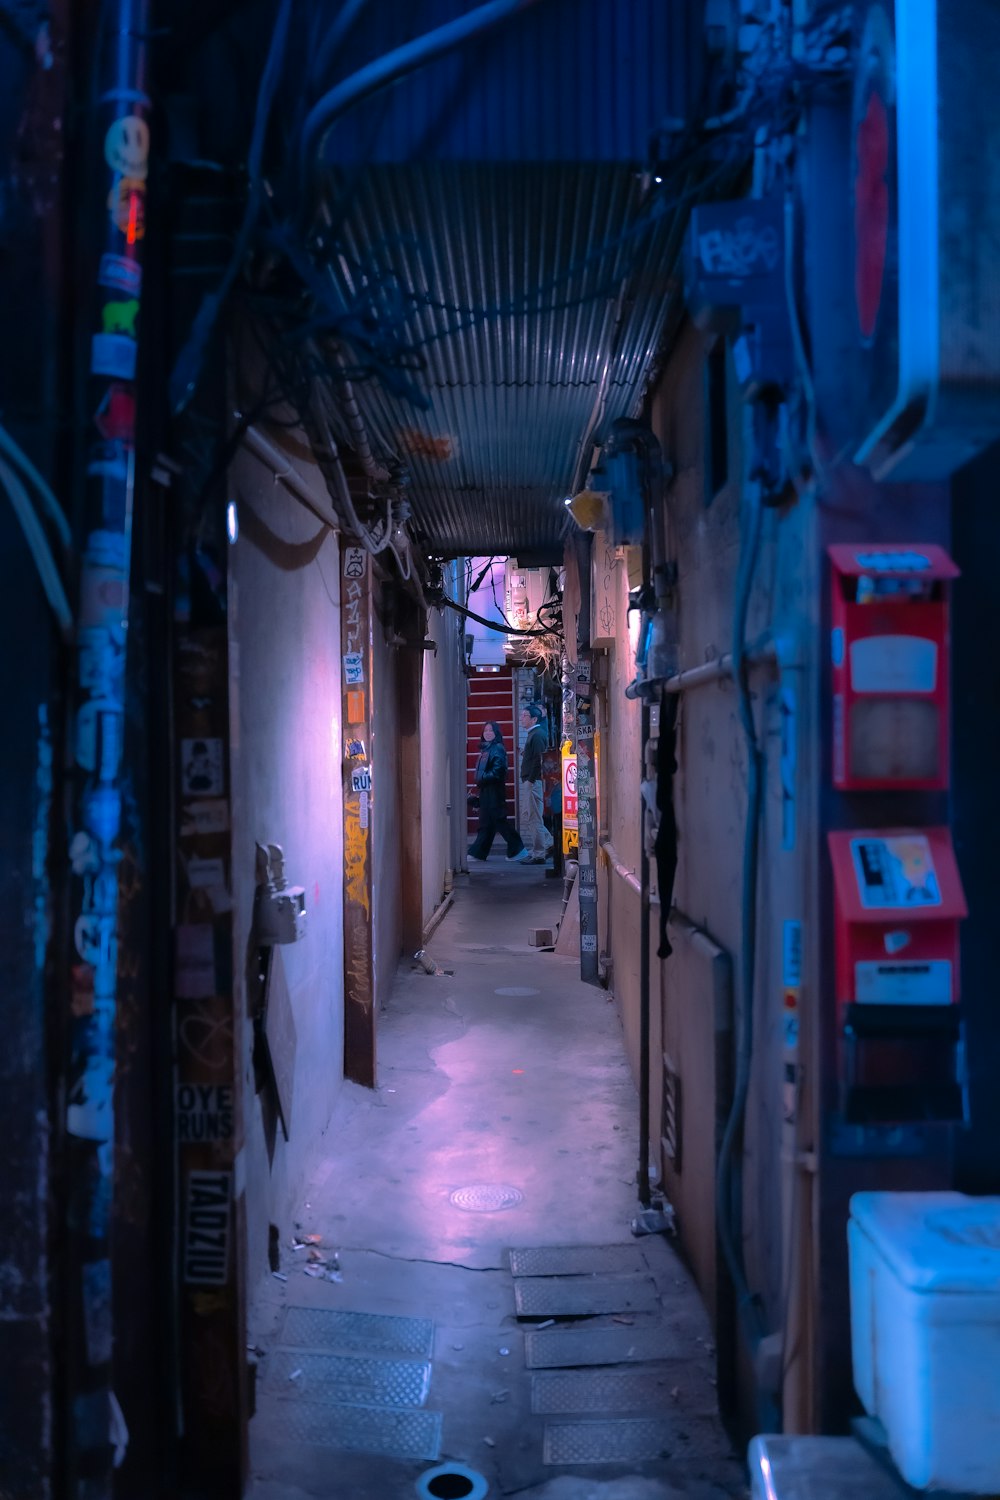 a narrow alley way with a toilet in the middle